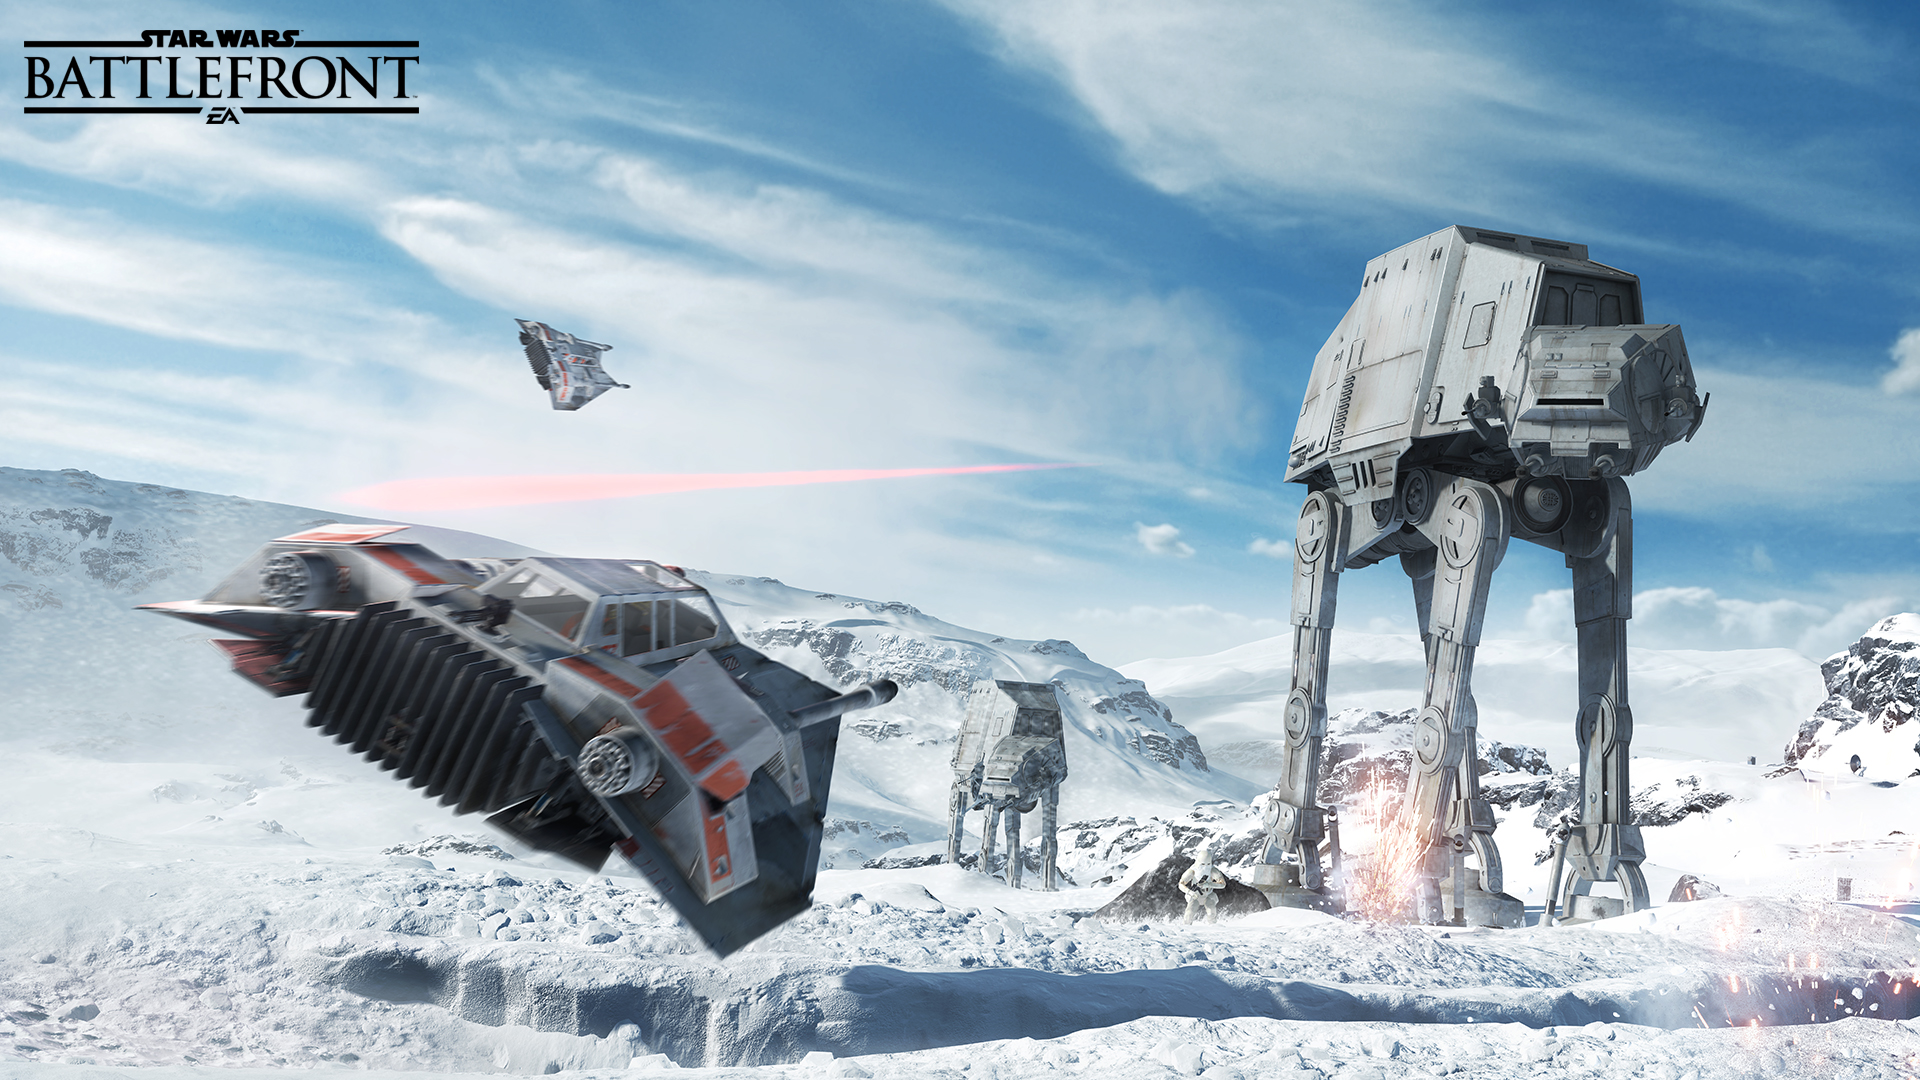 Star Wars Battlefront Ultimate edition, Electronic Arts, PlayStation 4, 014633737219 - image 3 of 12